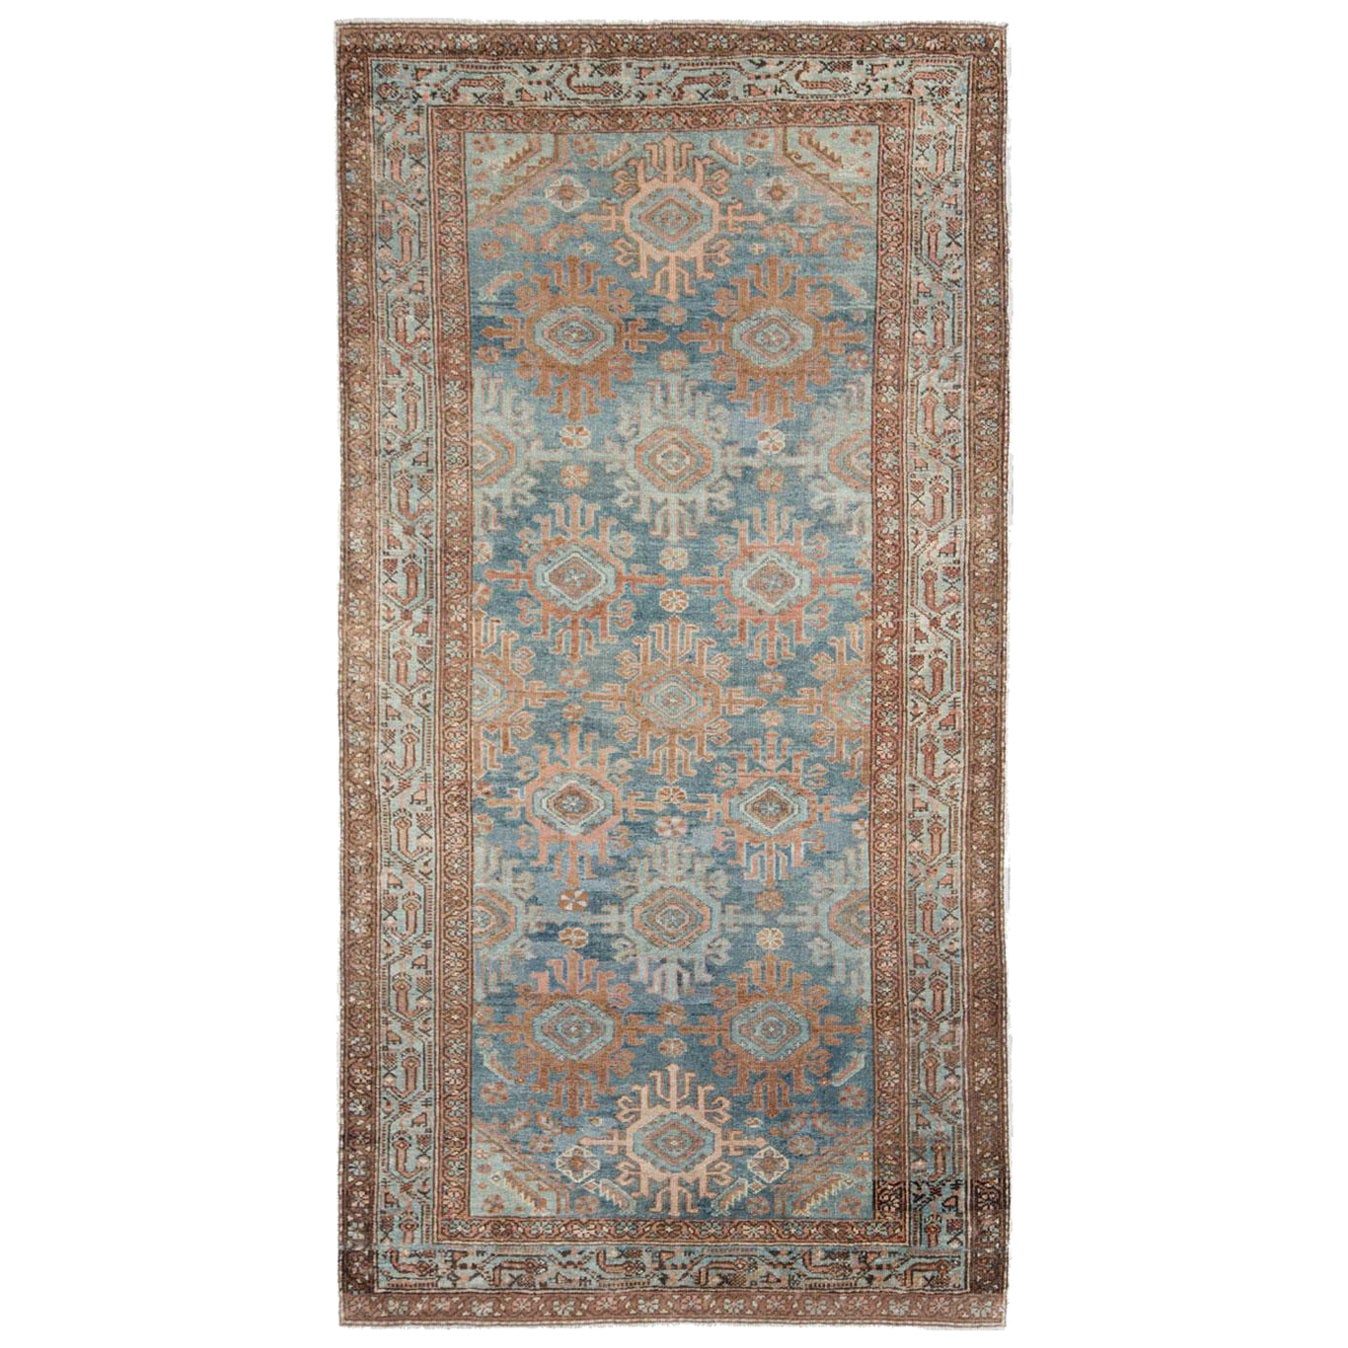 Early 20th Century Handmade Persian Malayer Small Accent Rug